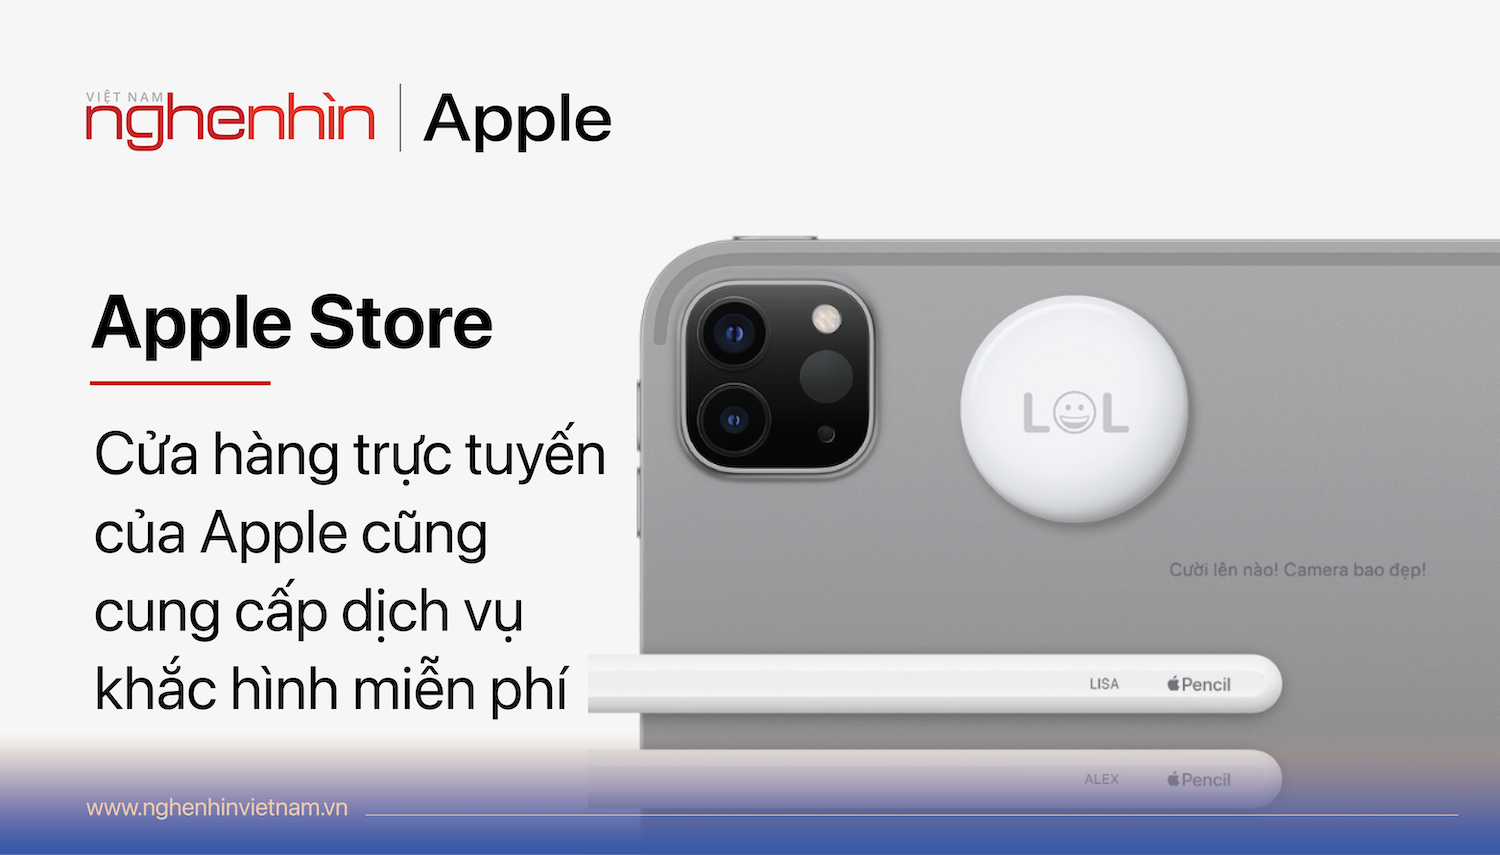 apple-store-truc-tuyen-chinh-thuc-hoat-dong-2.png (784 KB)